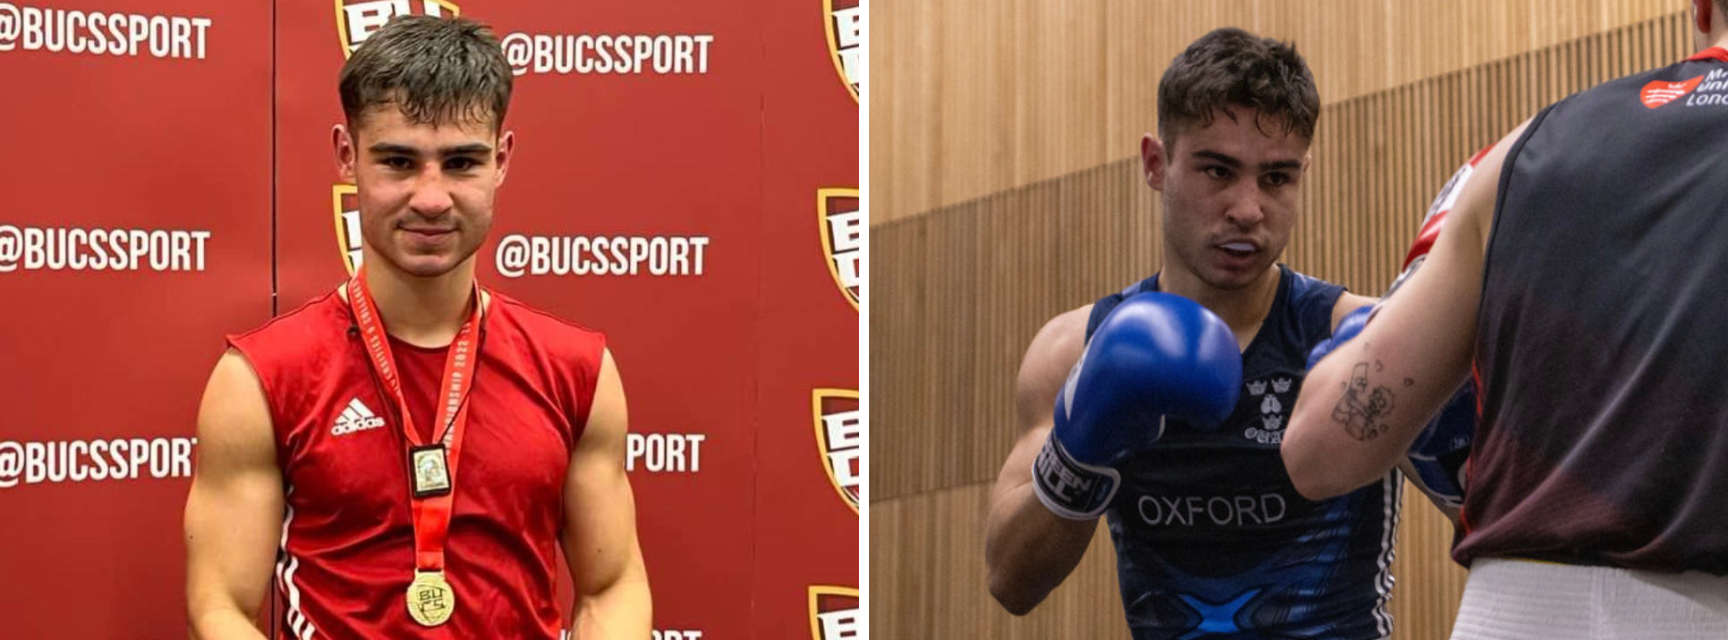 Profile image of Roberto Lacourt and image of Roberto Lacourt boxing